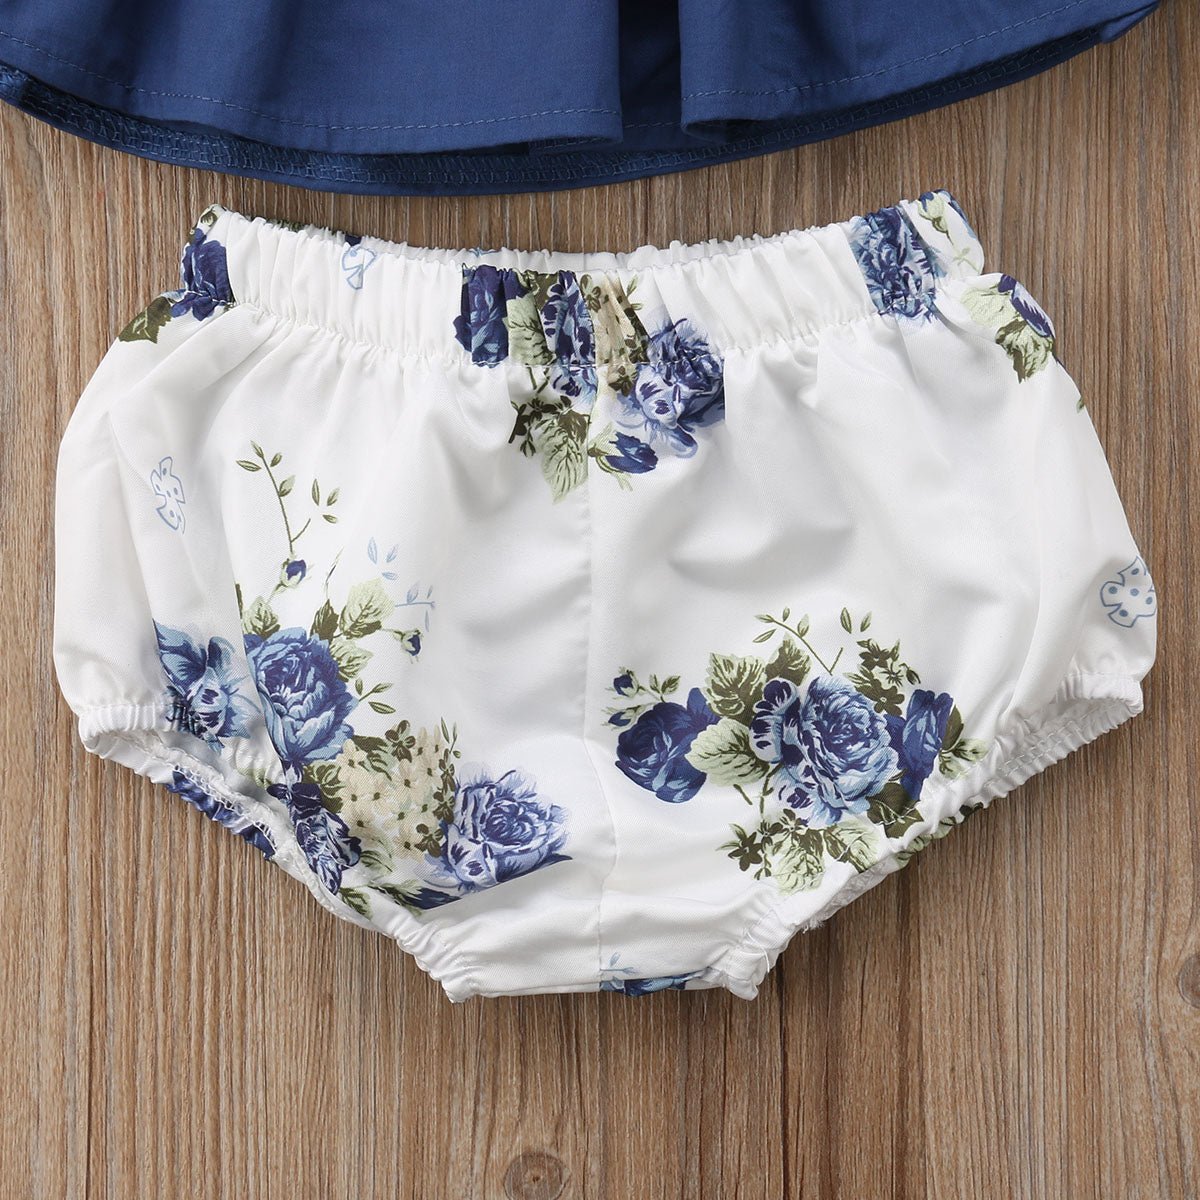 Dress and bloomers ser - Adorable Attire